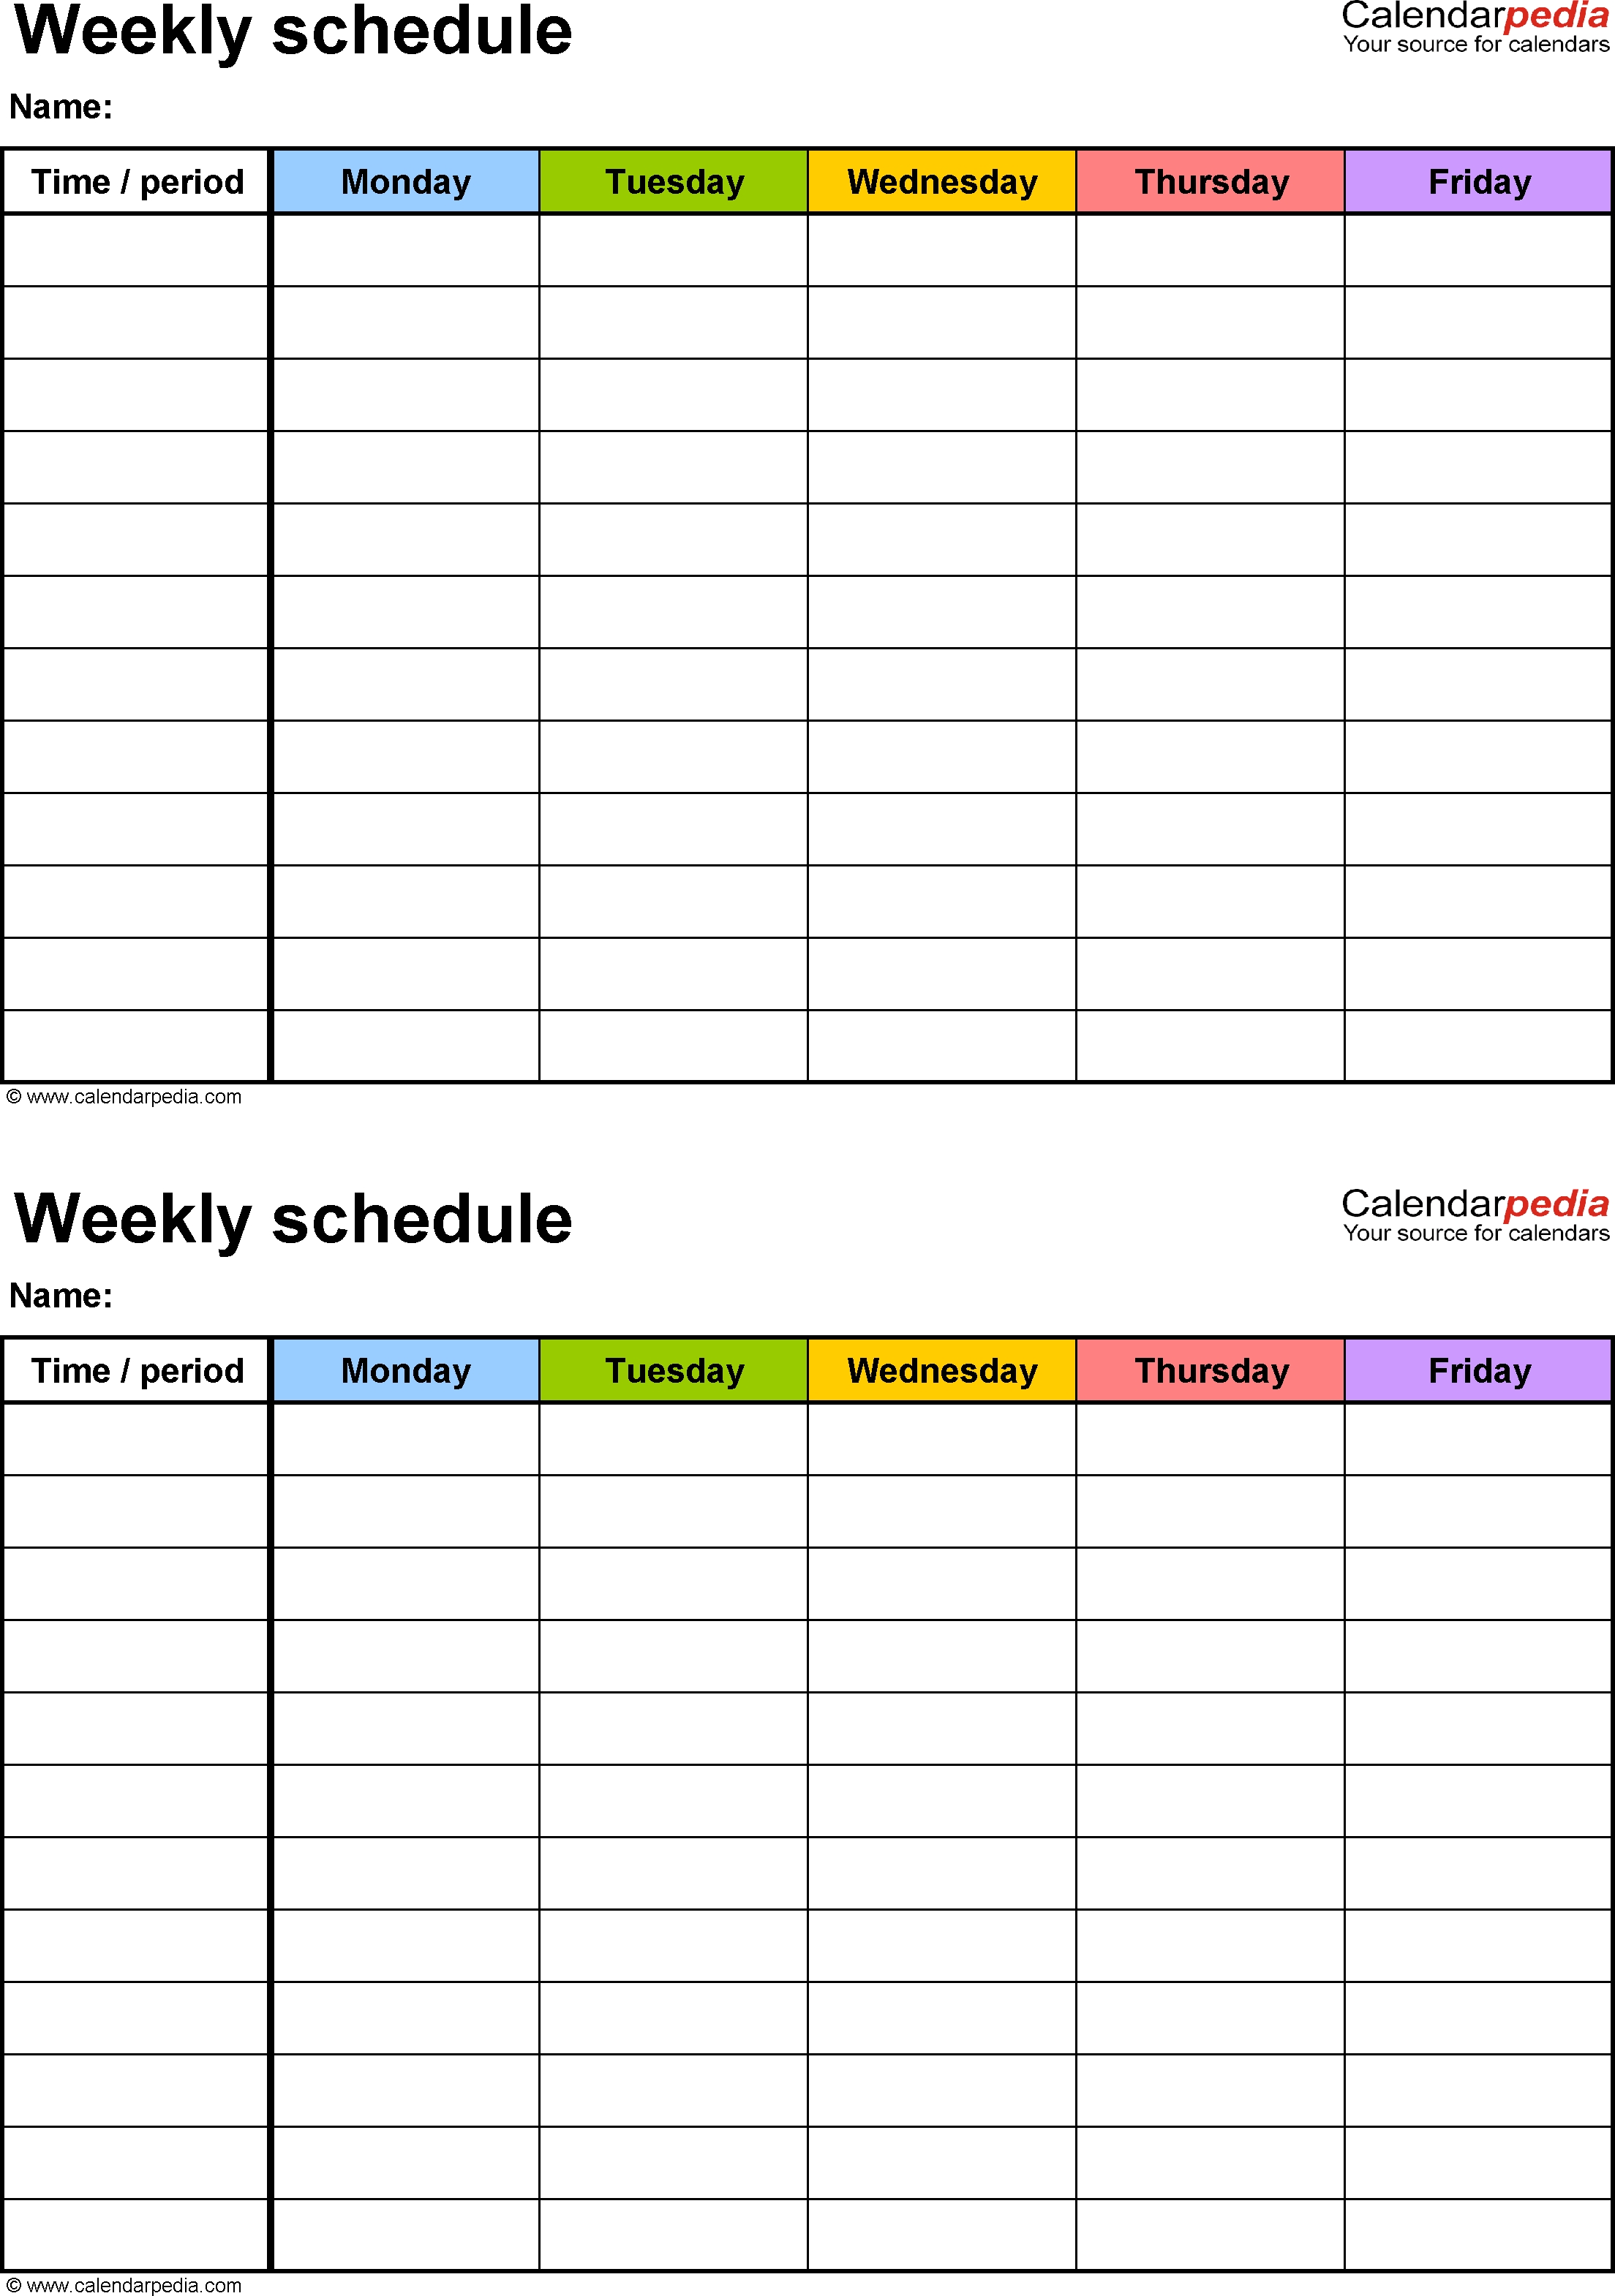 Free Weekly Schedule Templates For Word - 18 Templates-Monday-Friday Blank Weekly Schedule